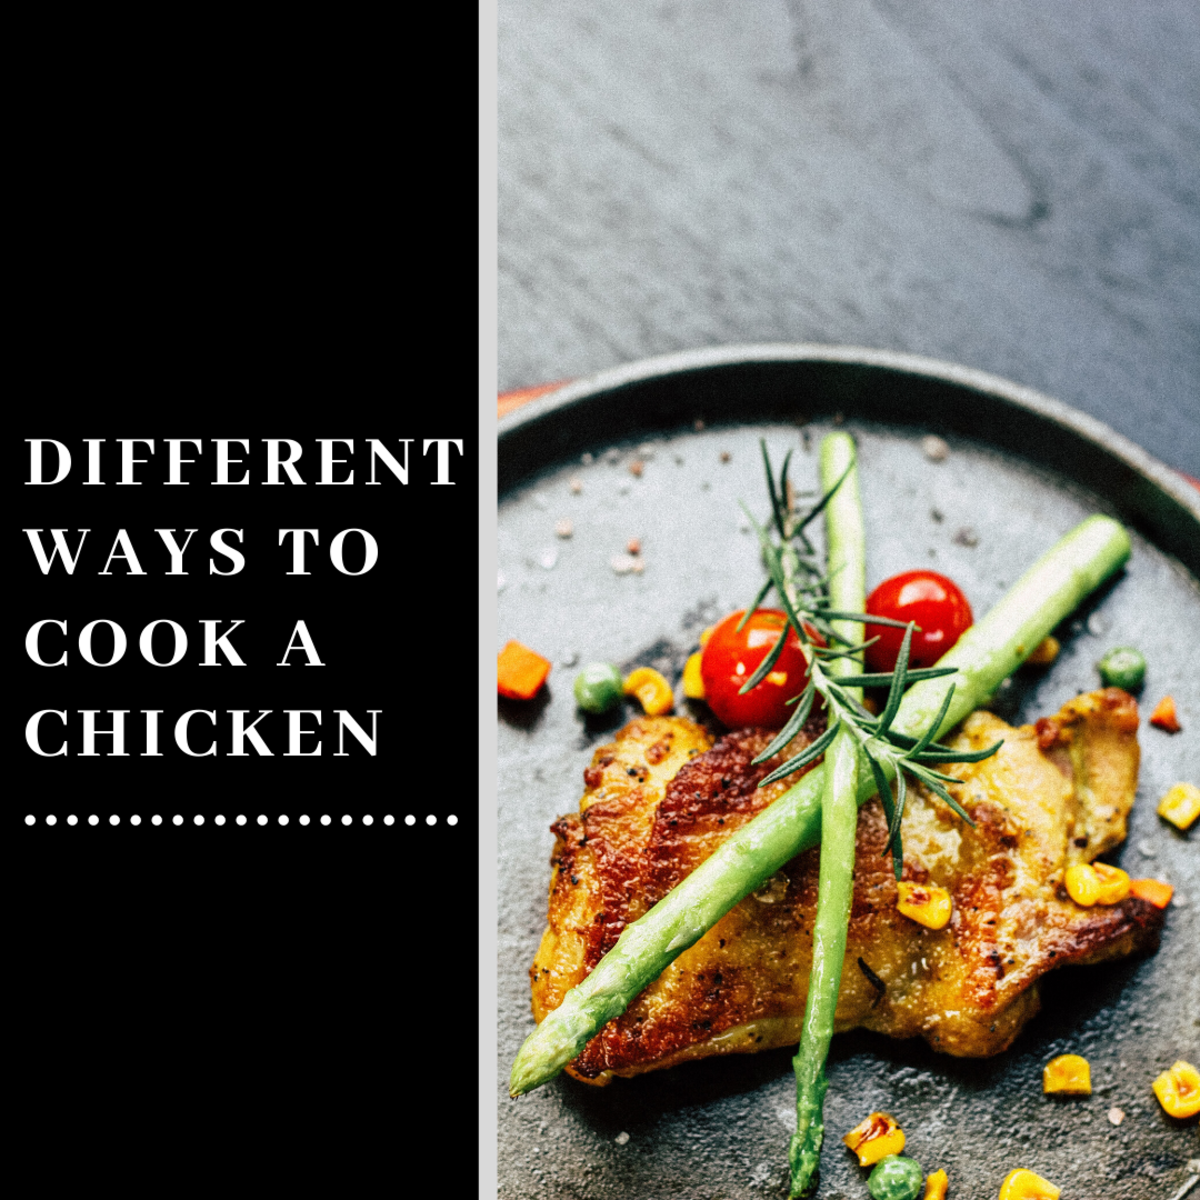 Chicken can be hard to cook right. Read on to learn more.